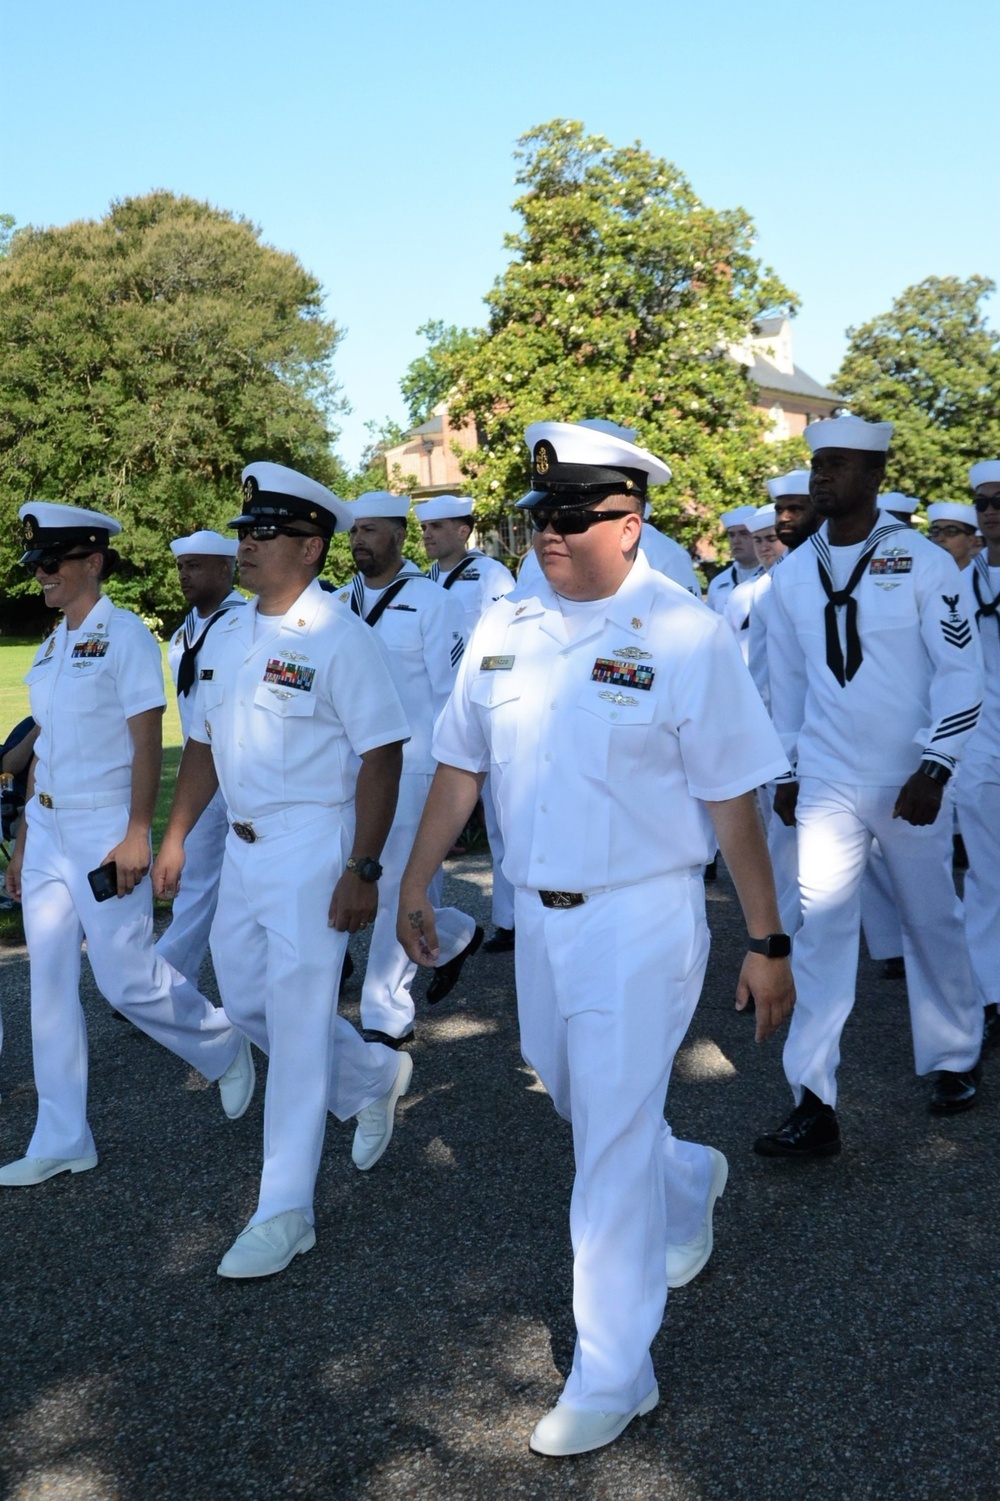 DVIDS - News - Naval Weapons Station Yorktown Celebrates 4th of July